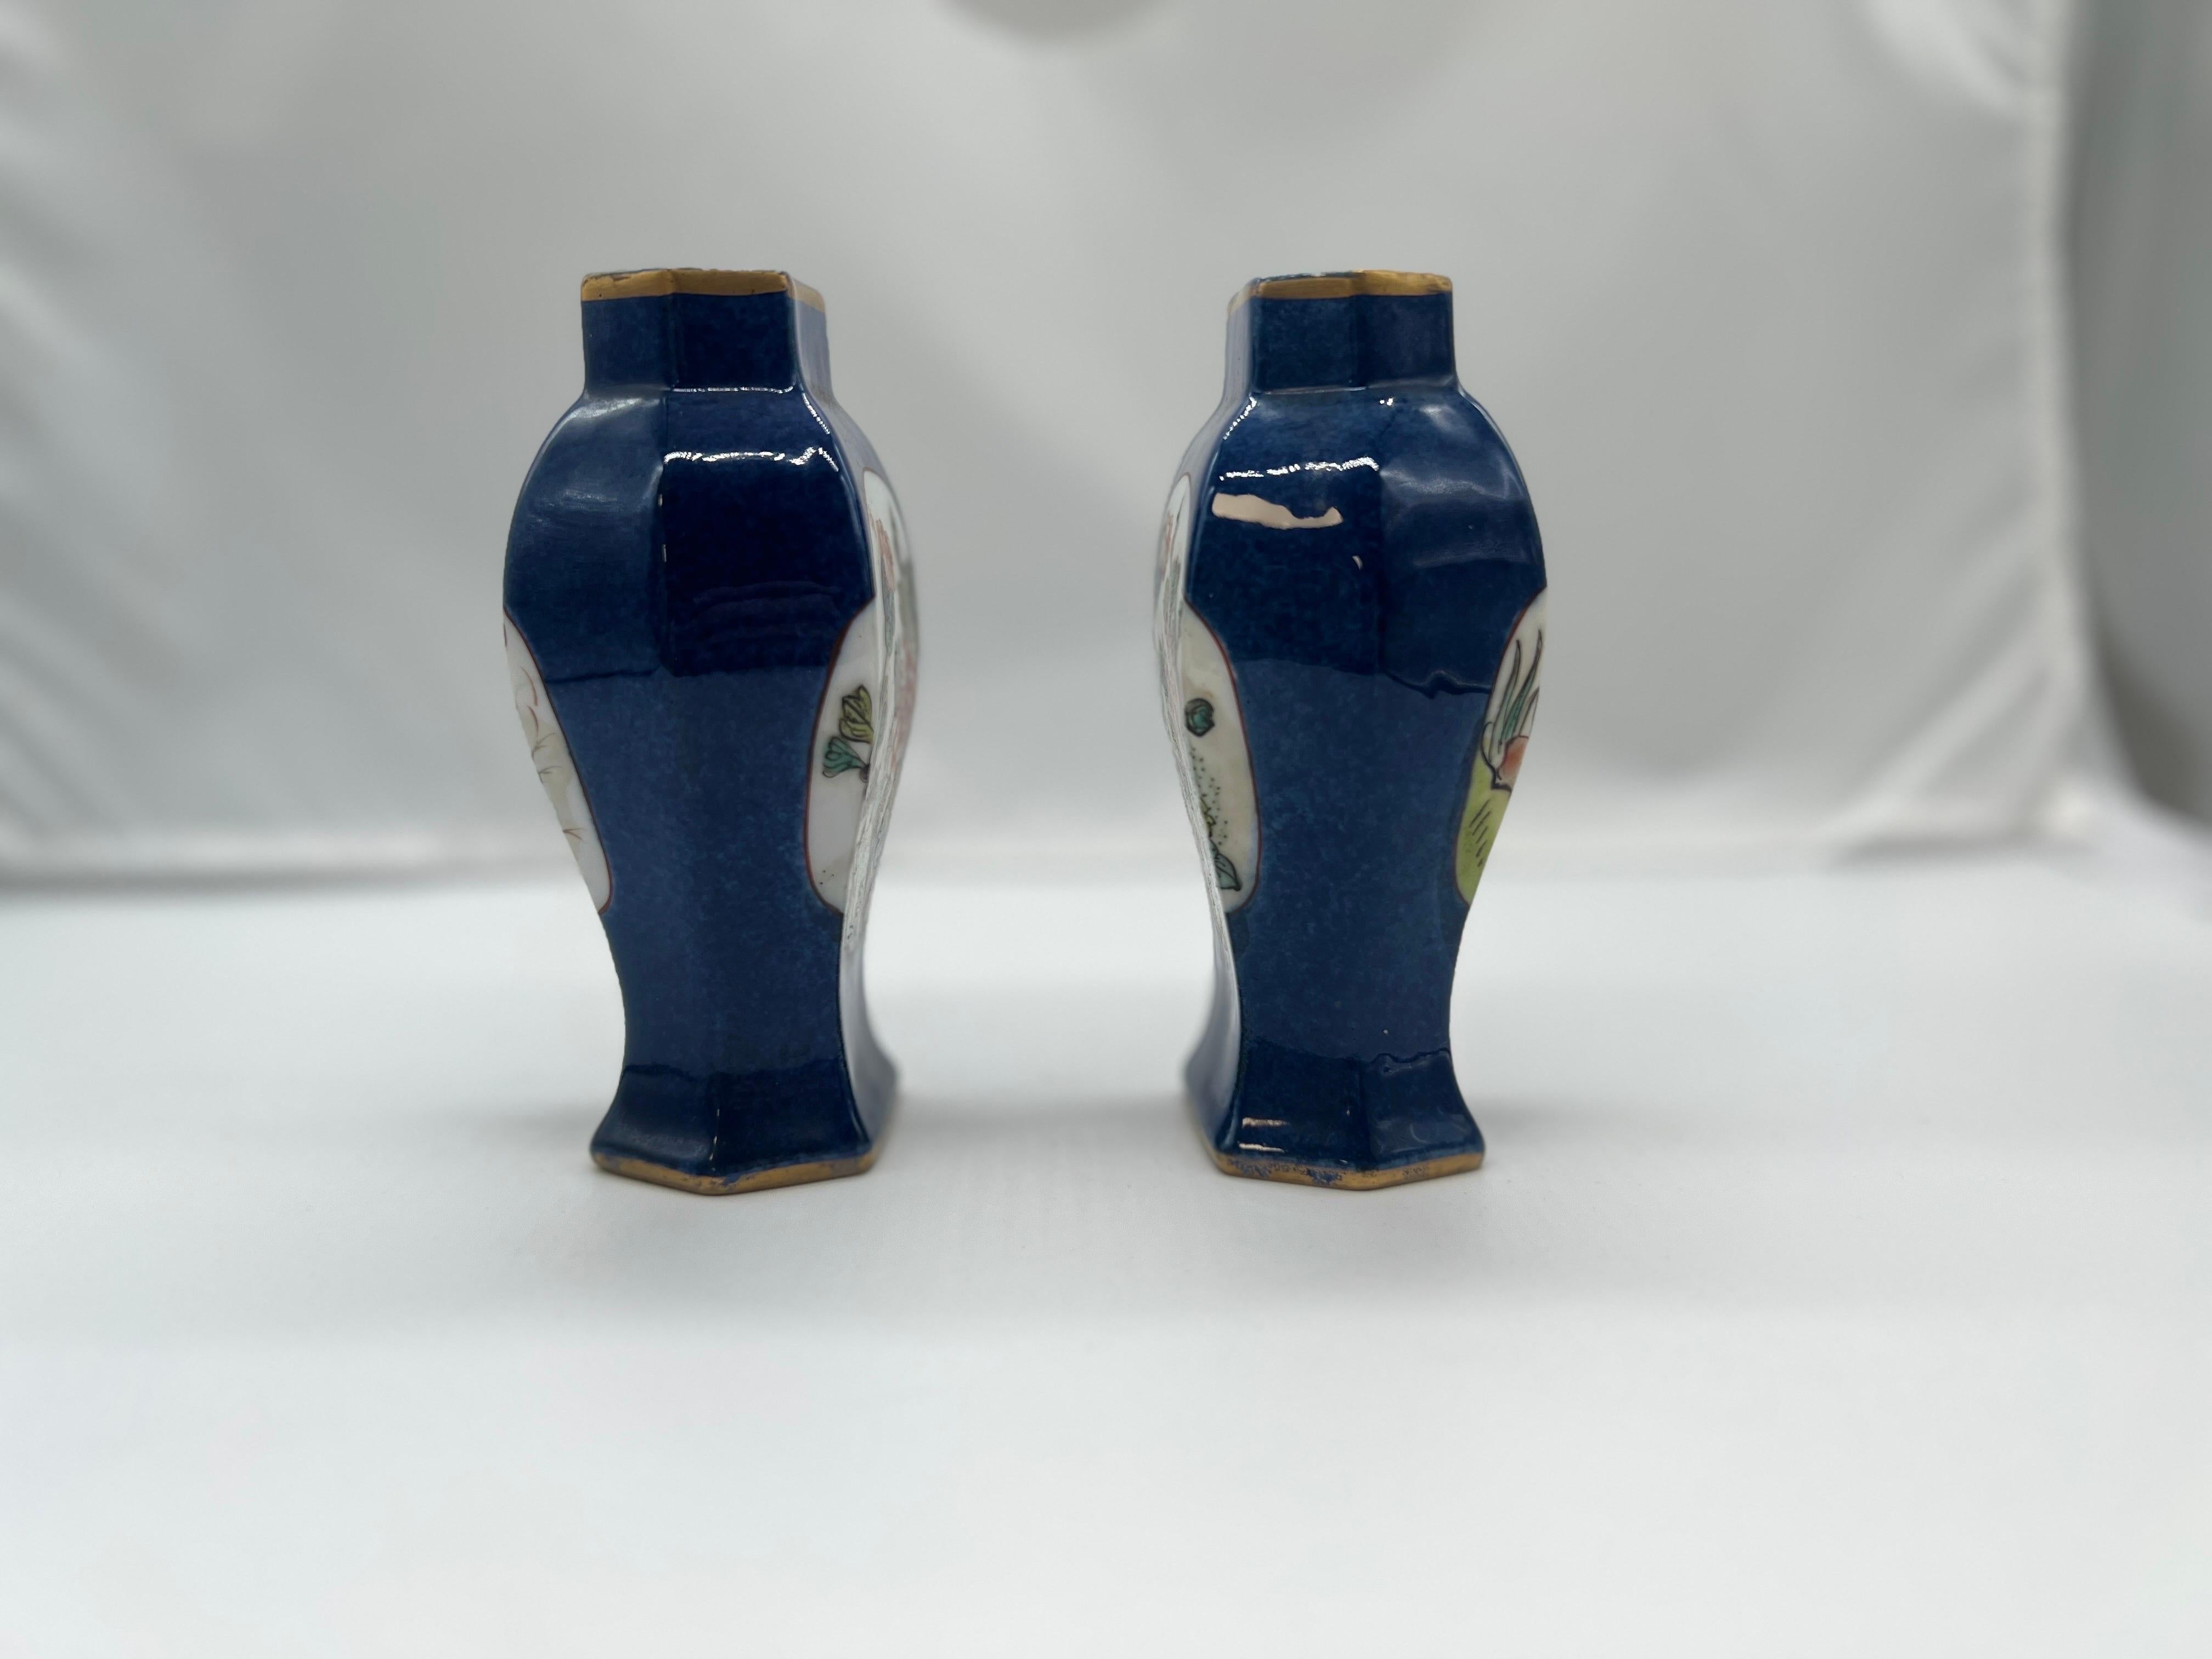 Chinese, likely late Qing Dynasty. 

A pair of porcelain urn or vases with a rich blue cobalt ground body accented by matched floral enameled windows to each side. Unmarked to underside. 

Provenance: From the estate of a Newport businessman.